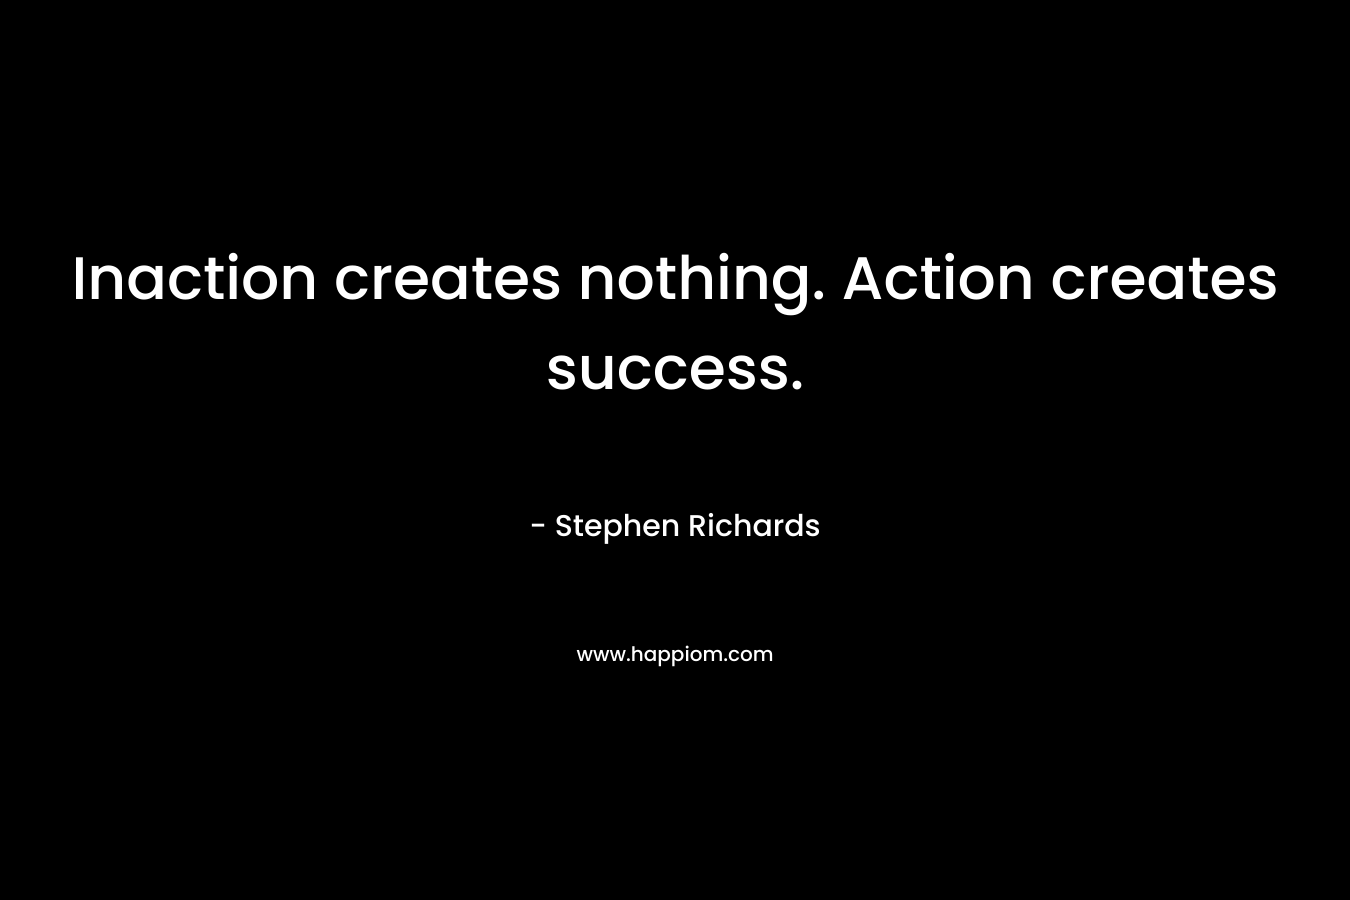 Inaction creates nothing. Action creates success.